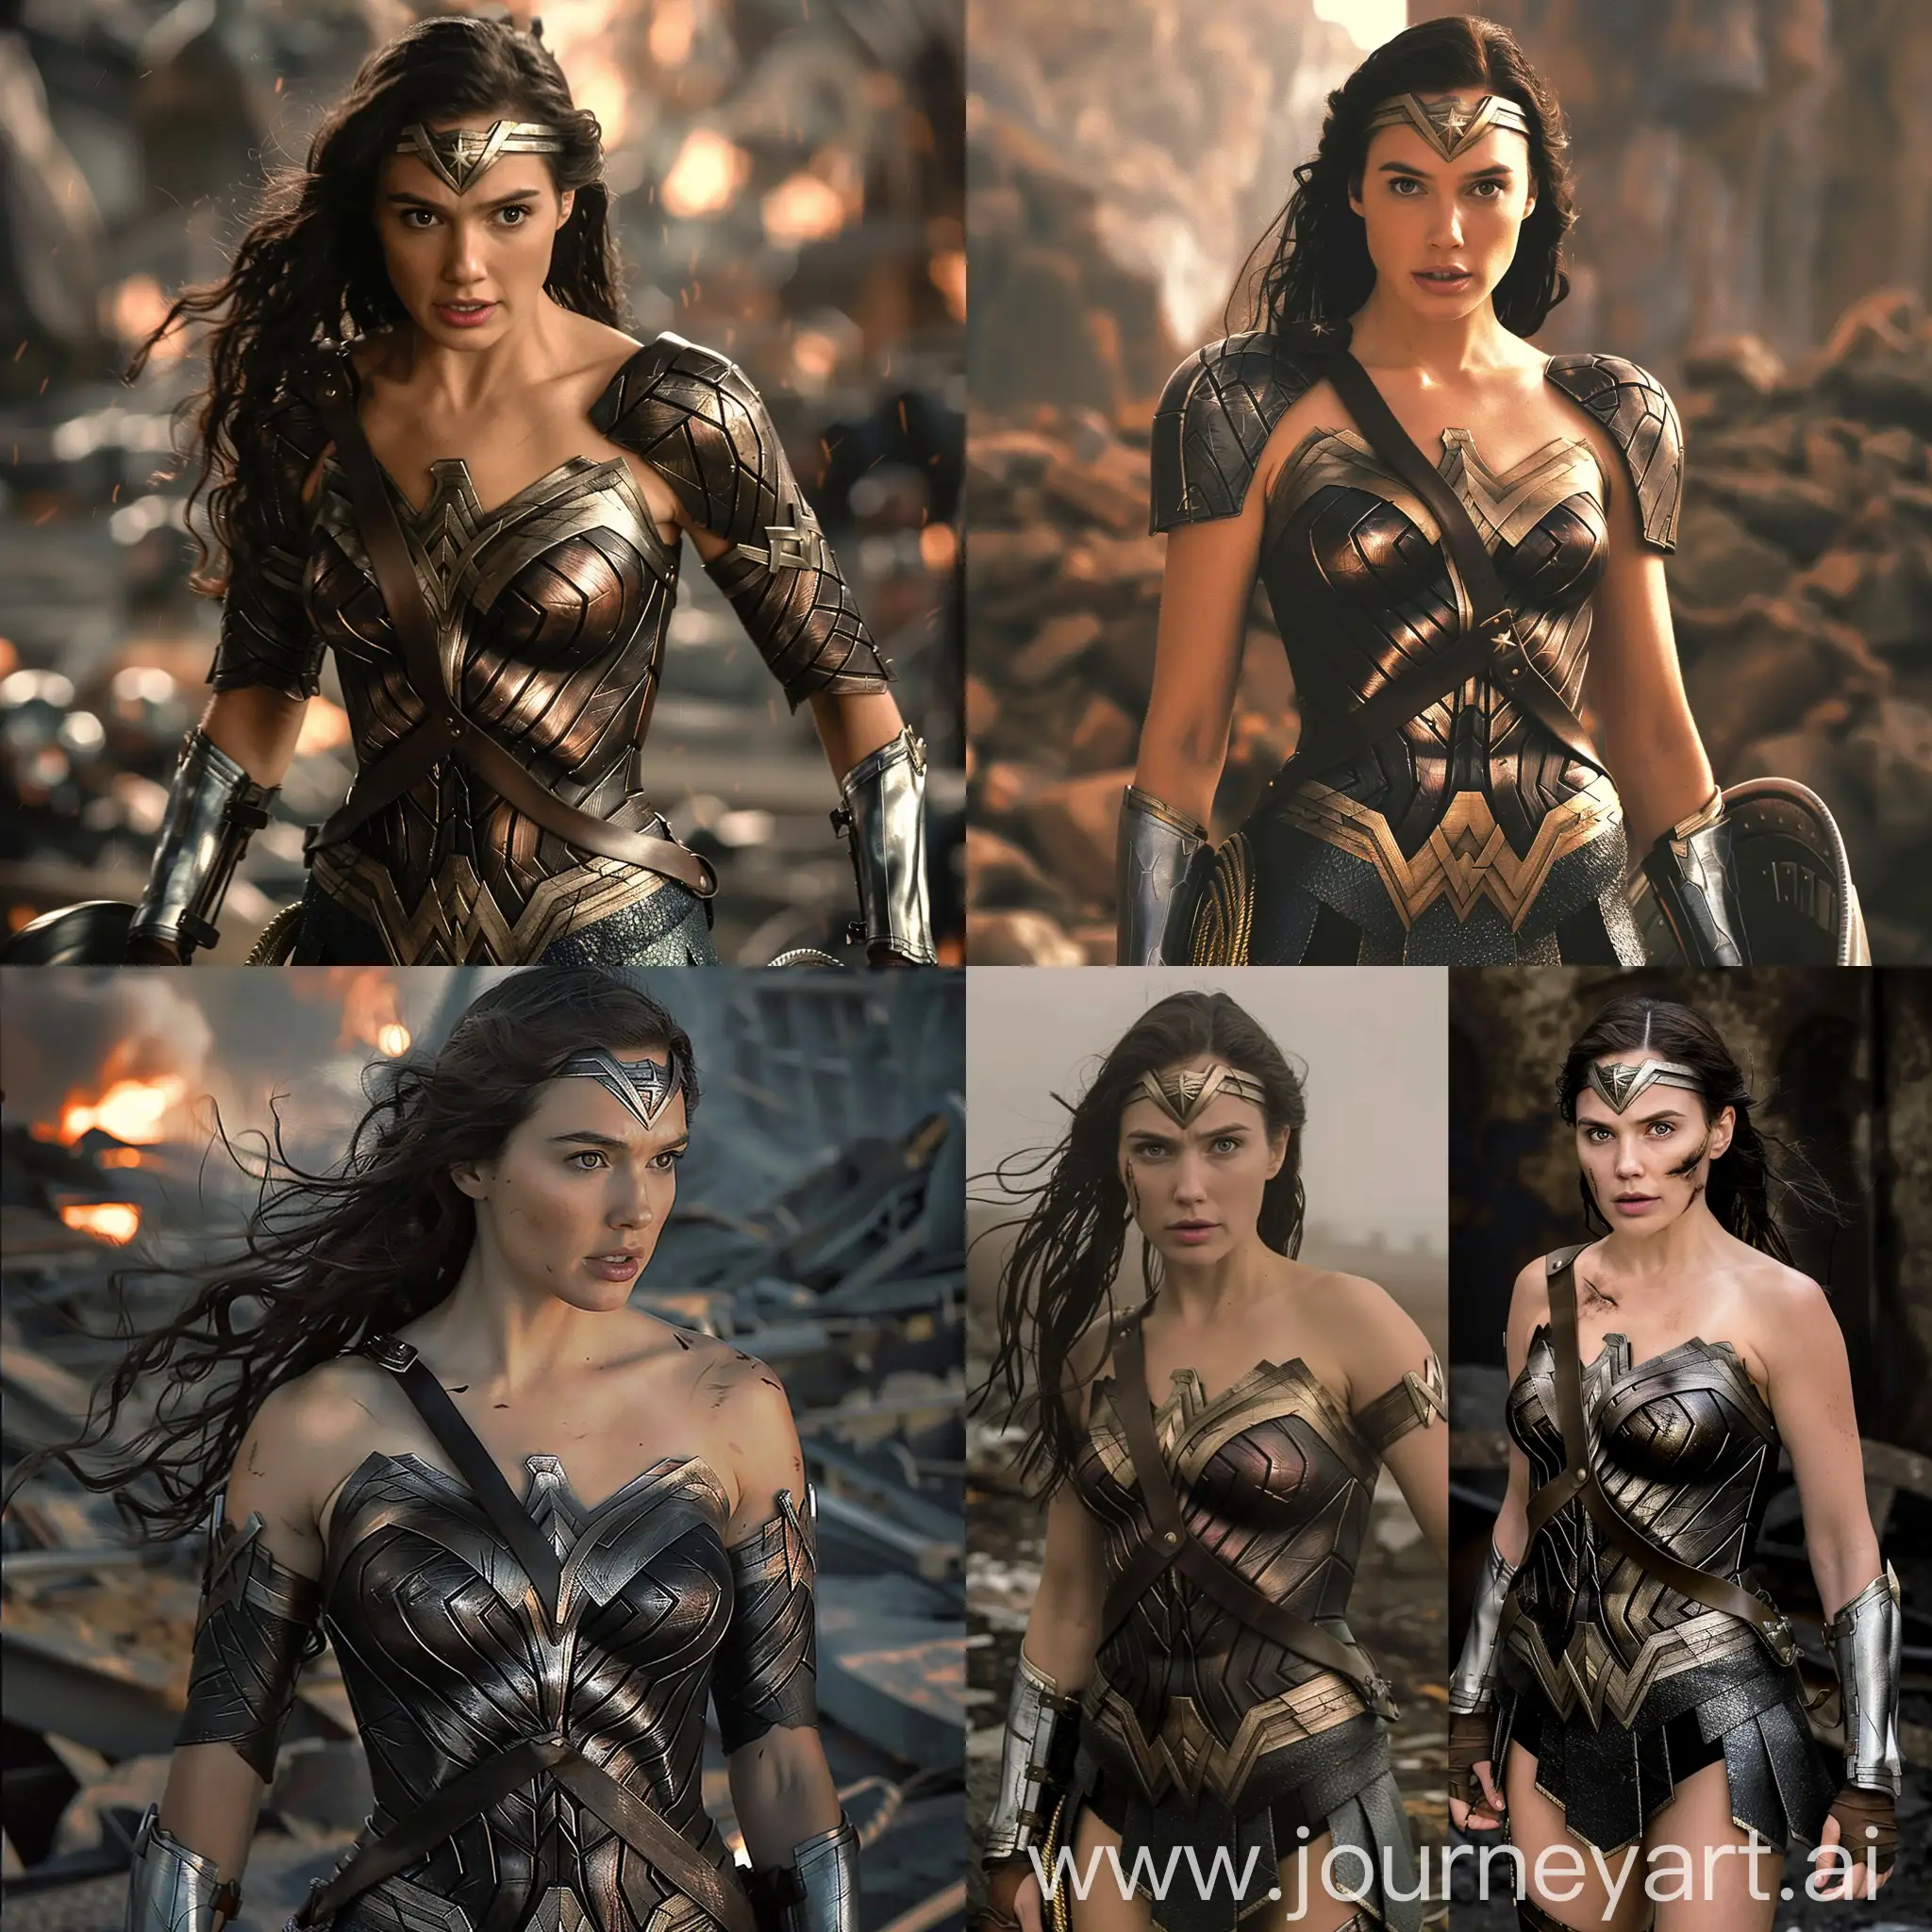 Gal Gadot in armor-like super girl costume in war and action scene. Make her full body 